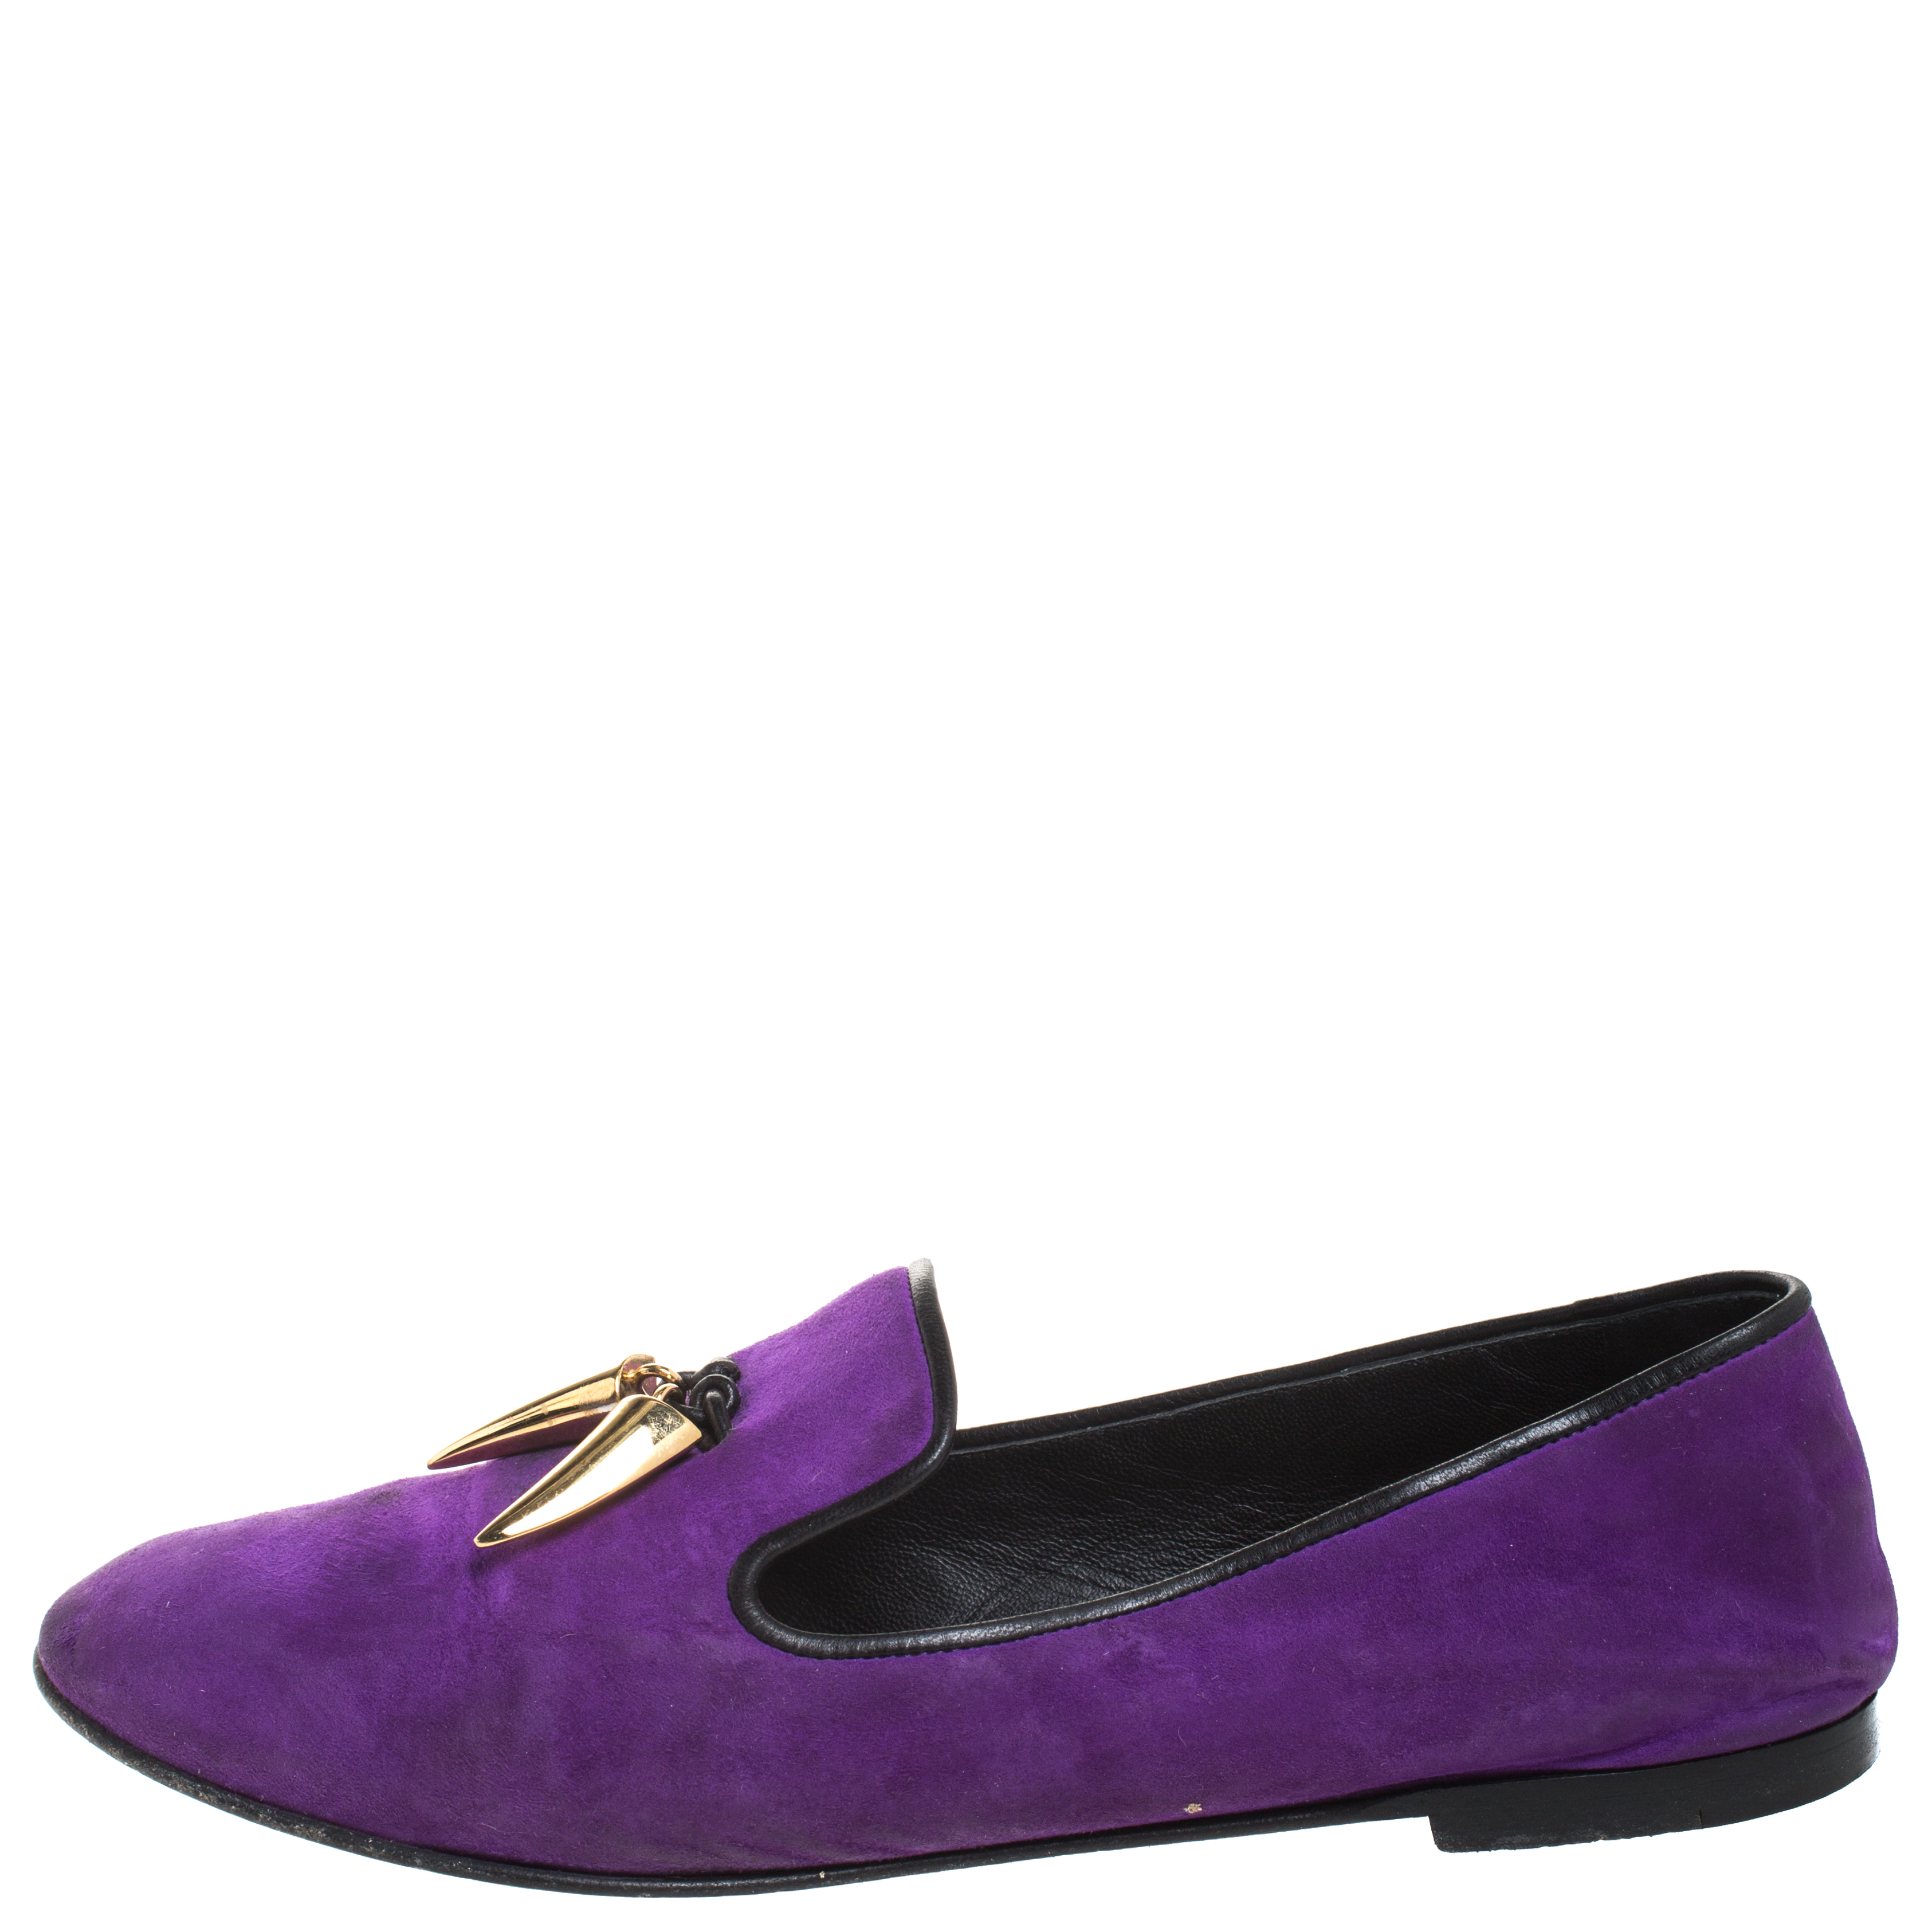 Pre-owned Giuseppe Zanotti Purple Suede Kevin Shark Tooth Tassel Smoking Slippers Size 38